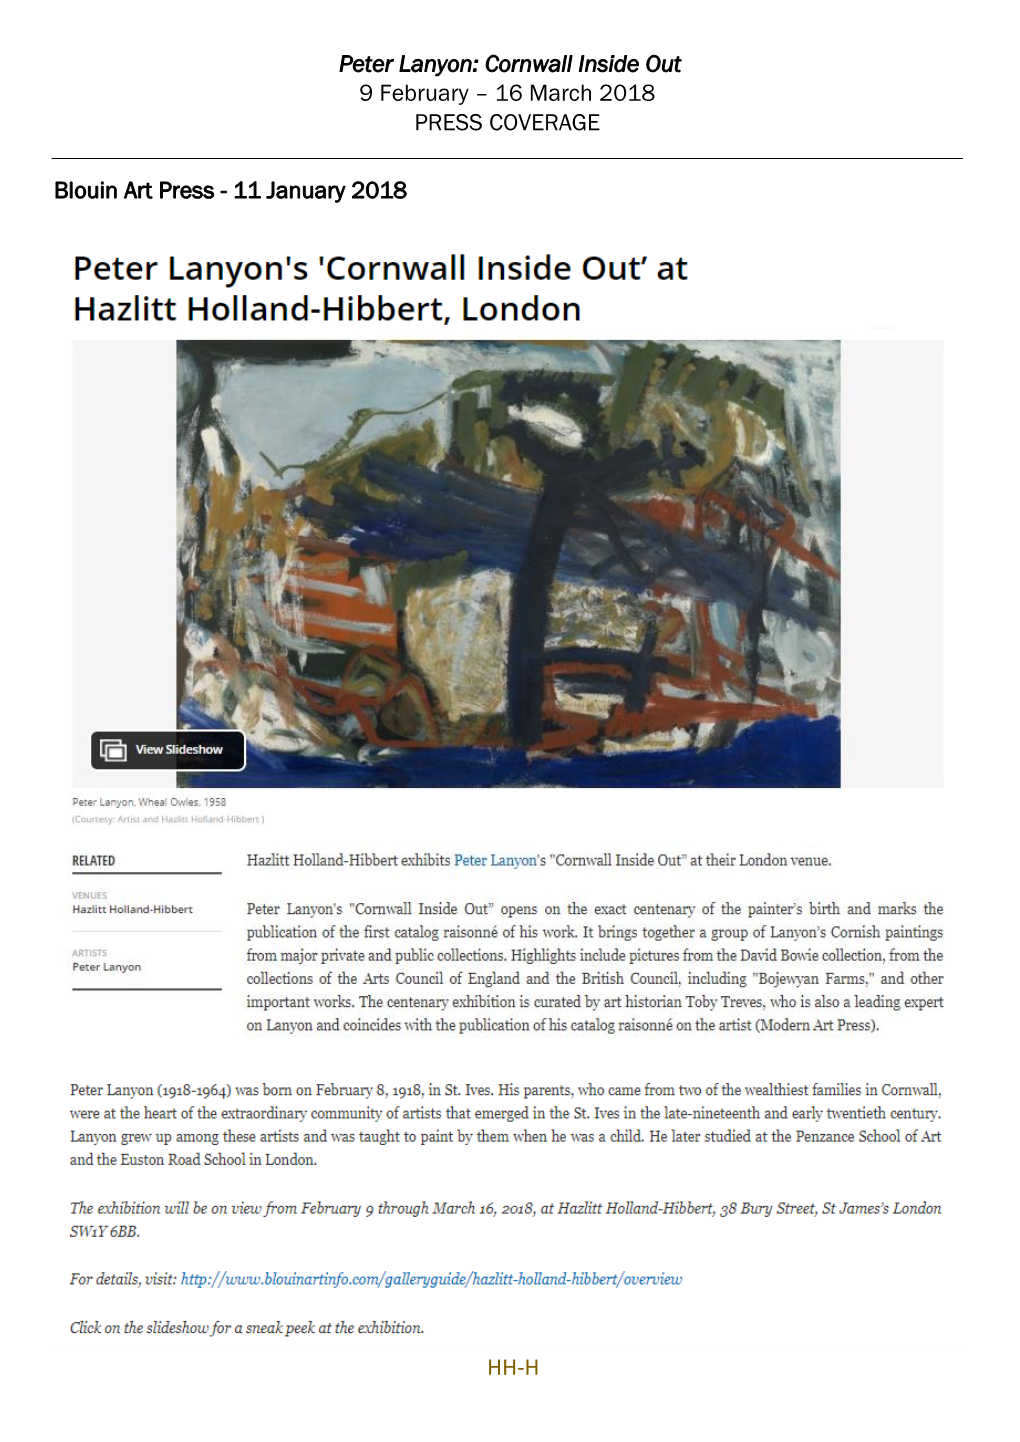 HH-H Peter Lanyon: Cornwall Inside out 9 February